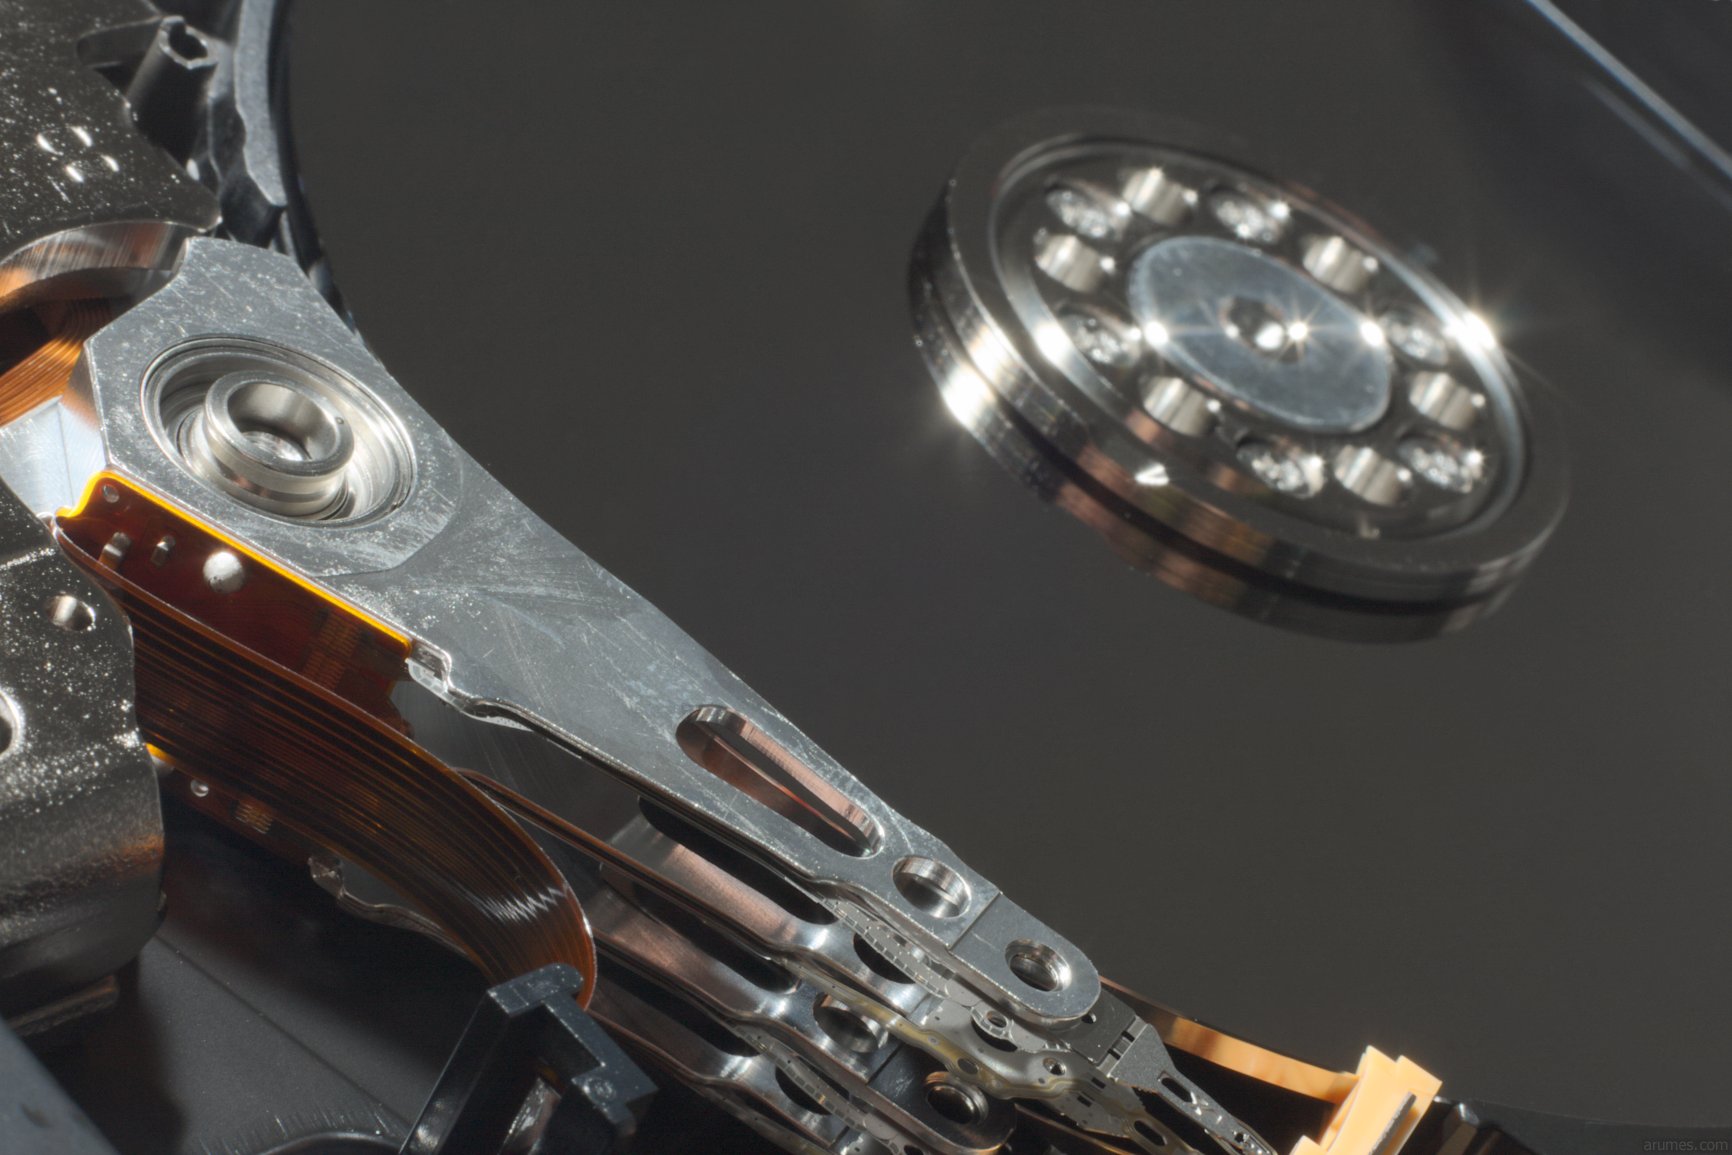 internal view of a hard disk drive